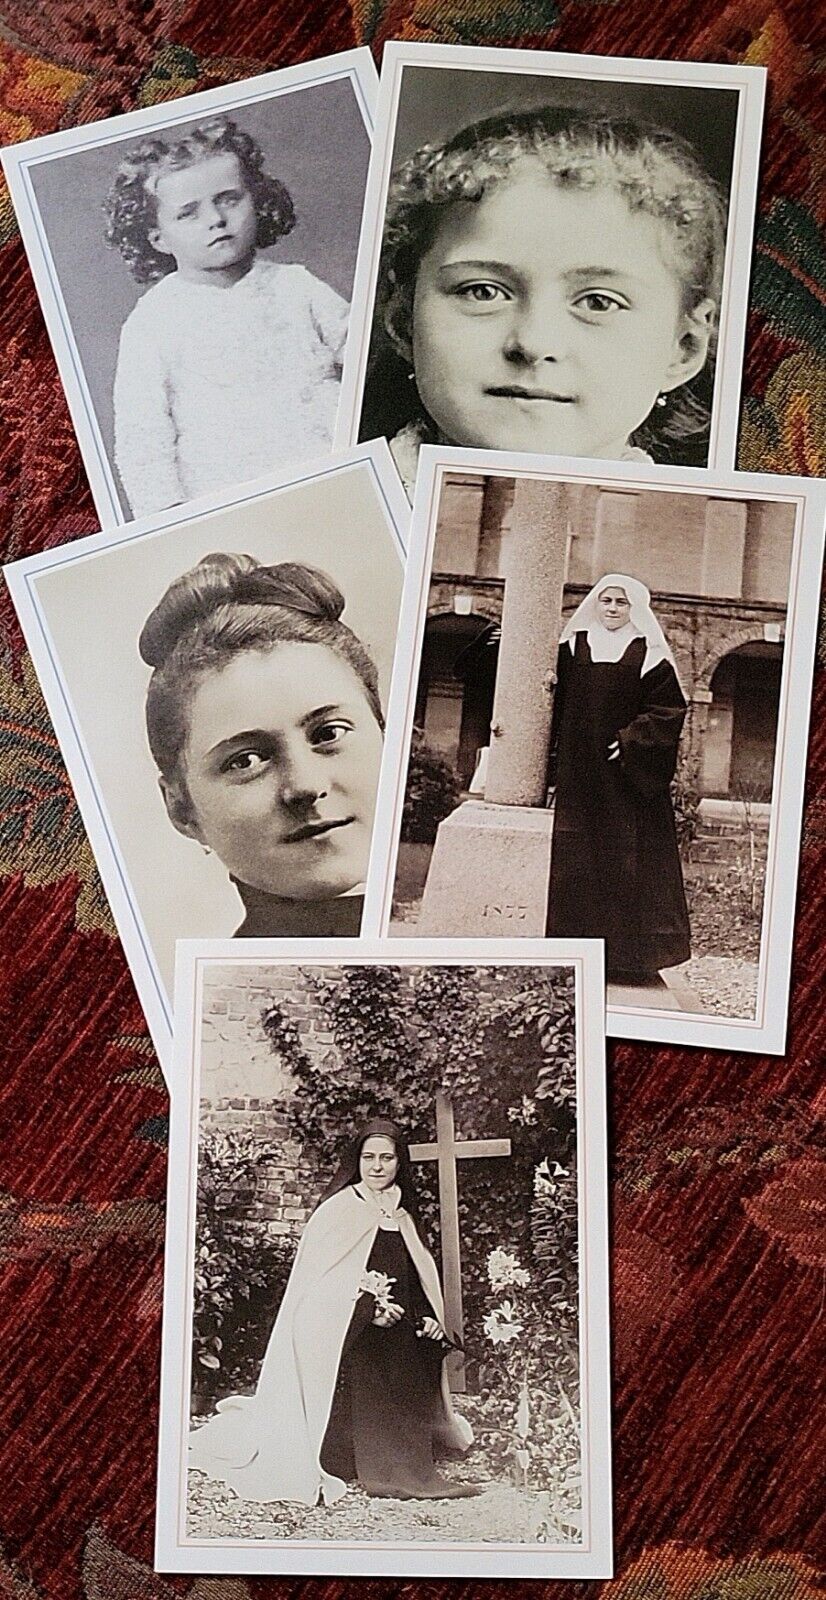 St. Therese Authentic Pictures Lot of 5 - Carmelite Catholic the Little Flower